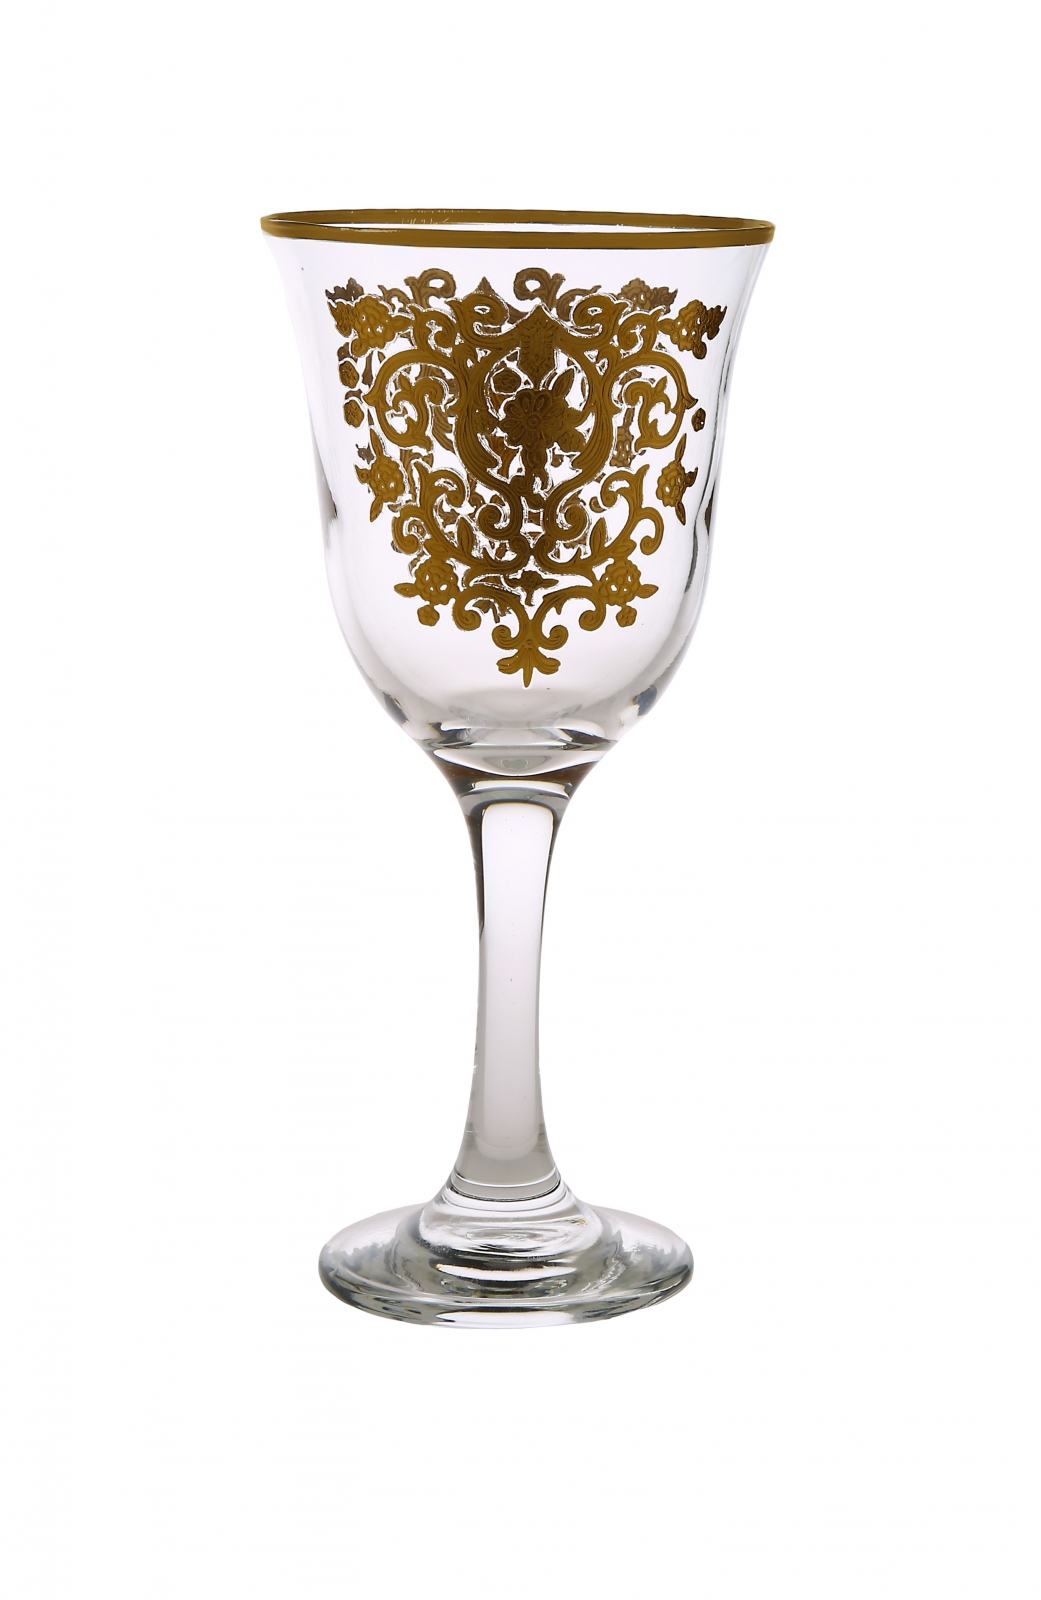 Set of 6 Water Glasses with Gold Design